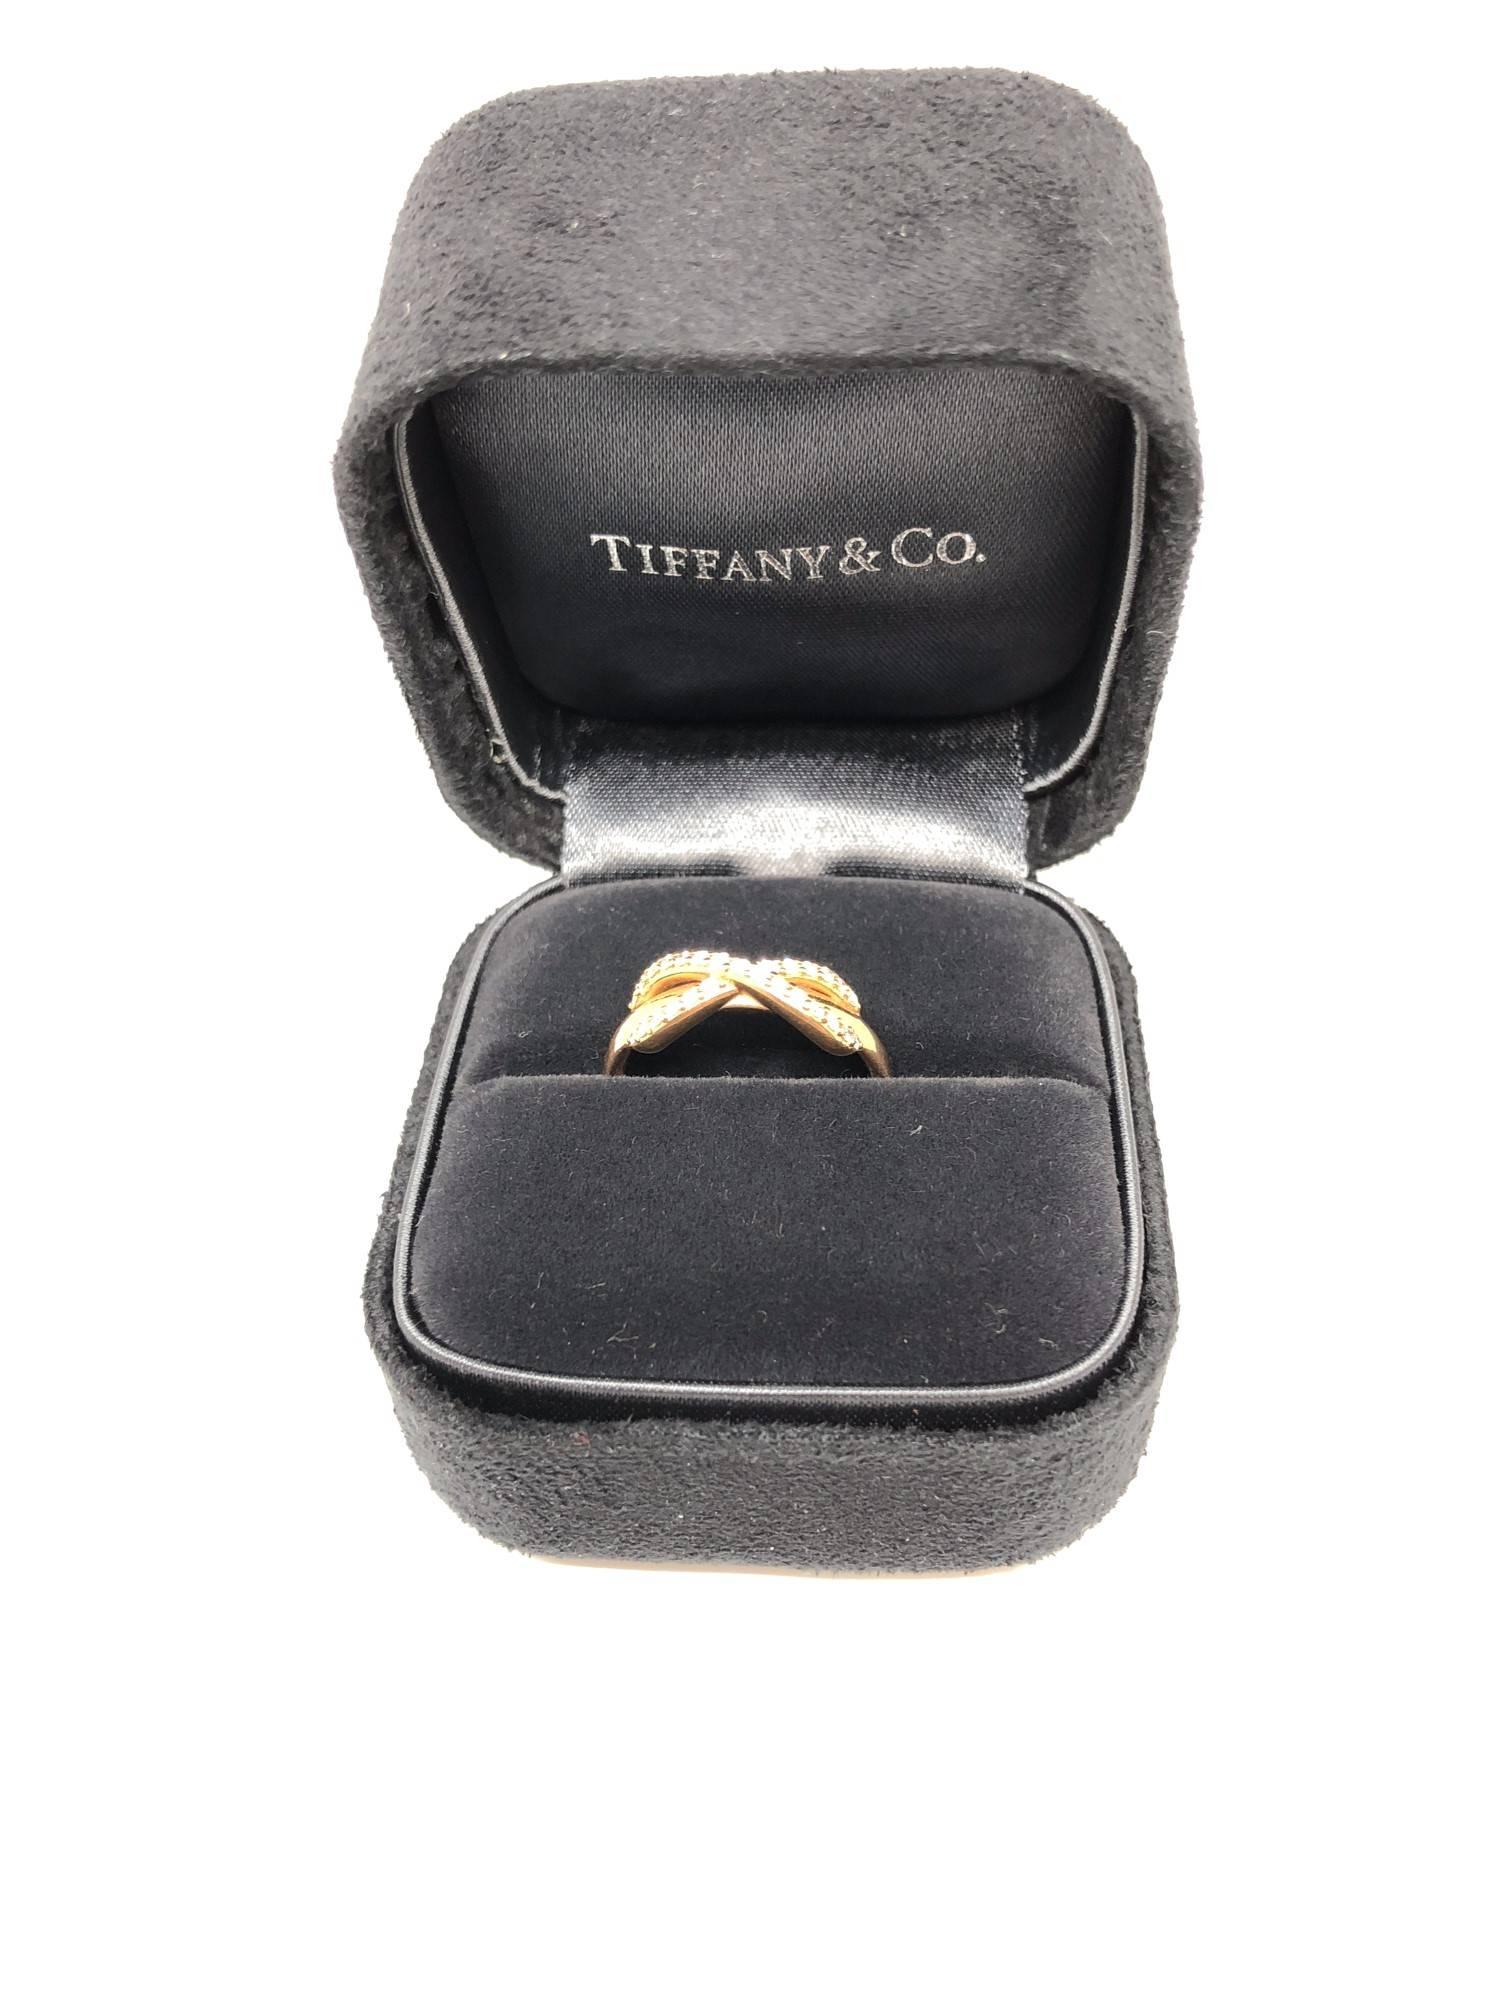 18k rose gold Infinity ring from Tiffany & Co. The diamonds loop around the band to create an elegant infinity symbol, signifying a continuous connection or energy.

18k rose Gold band with round cut diamonds.

Ring Size 4 1/2